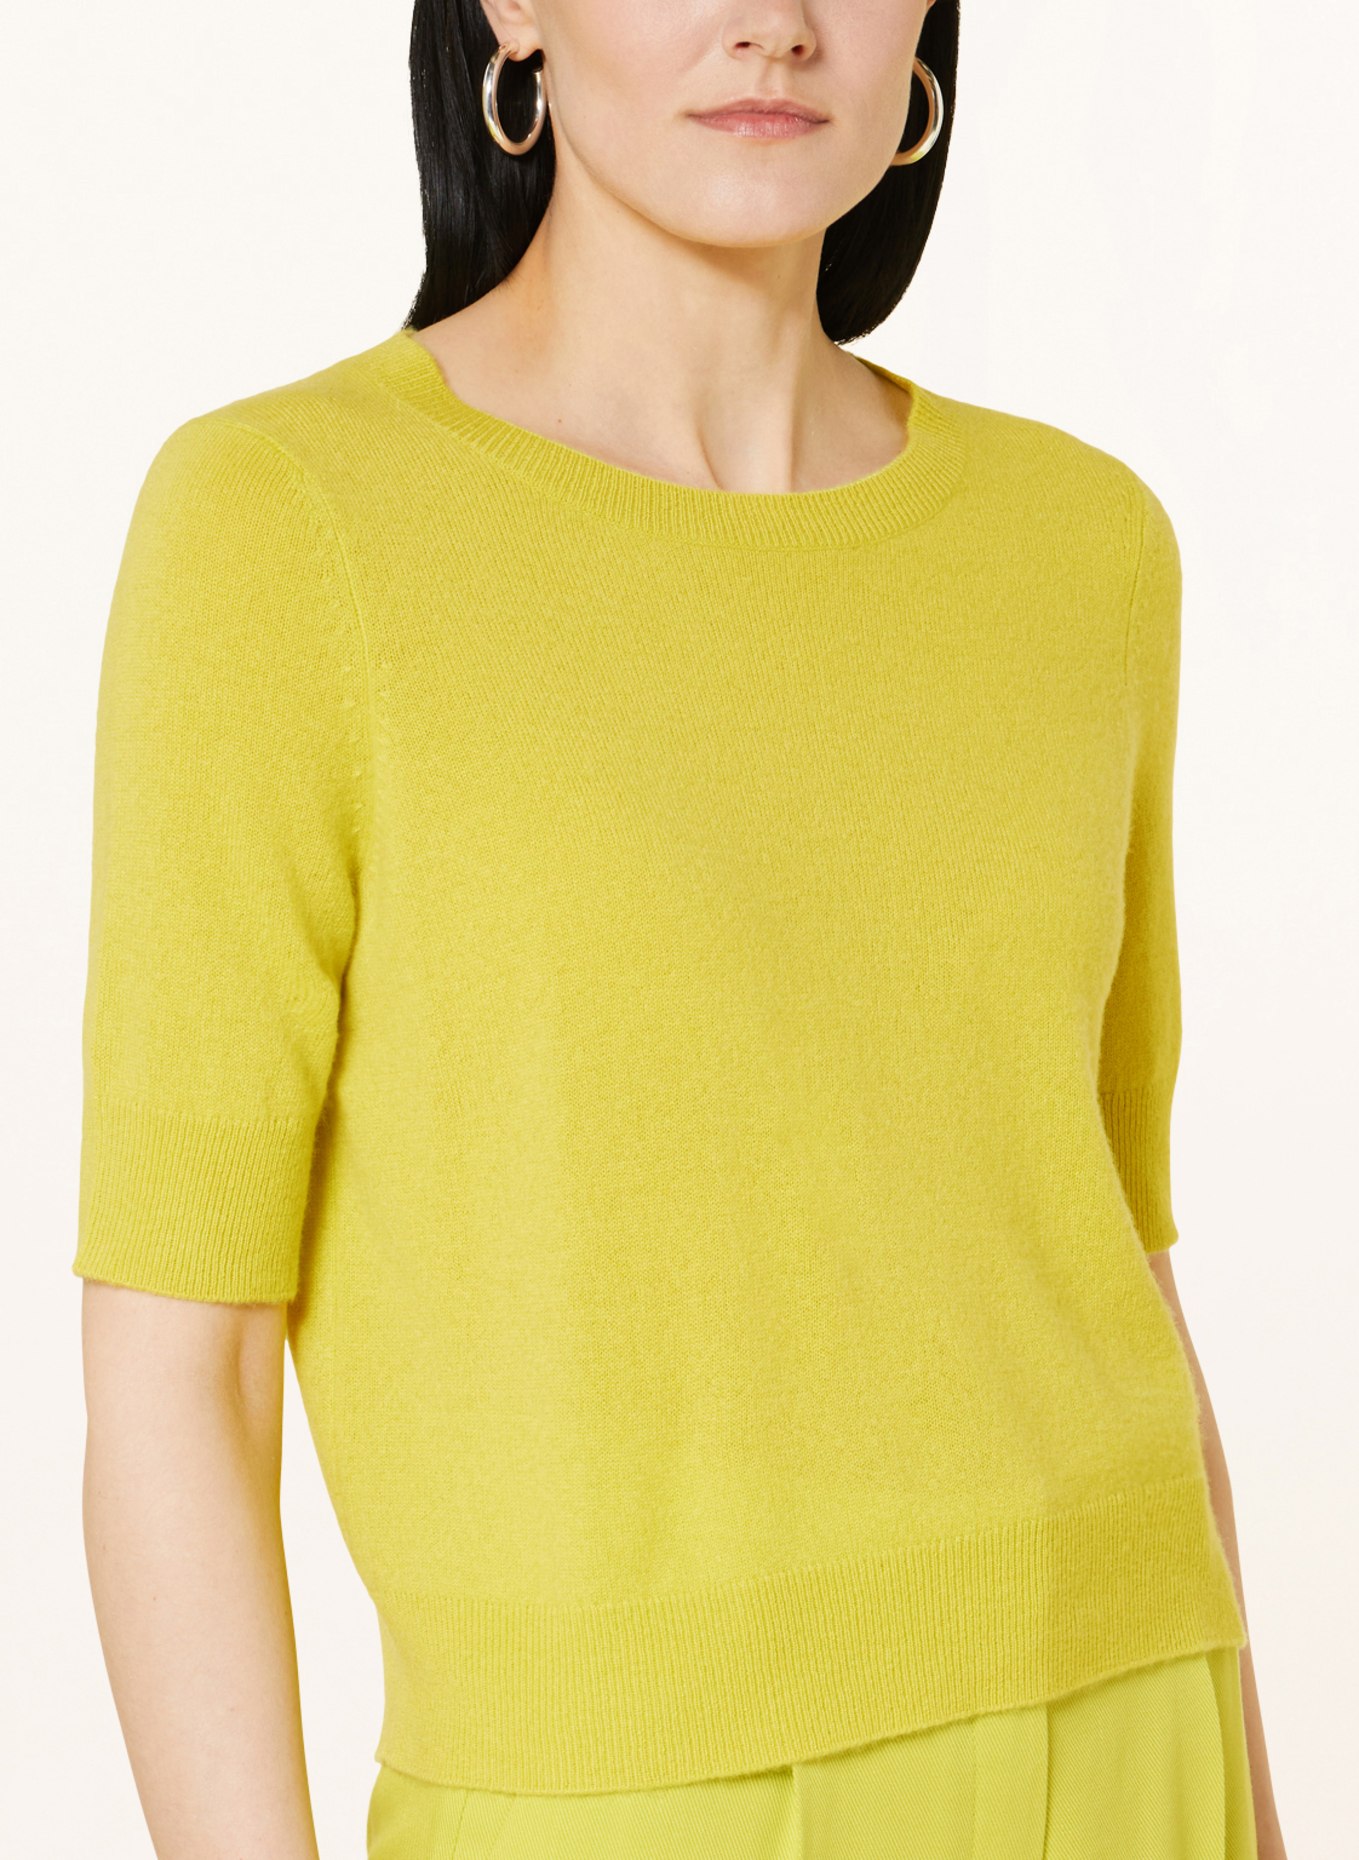 MRS & HUGS Knit shirt in cashmere, Color: YELLOW (Image 4)